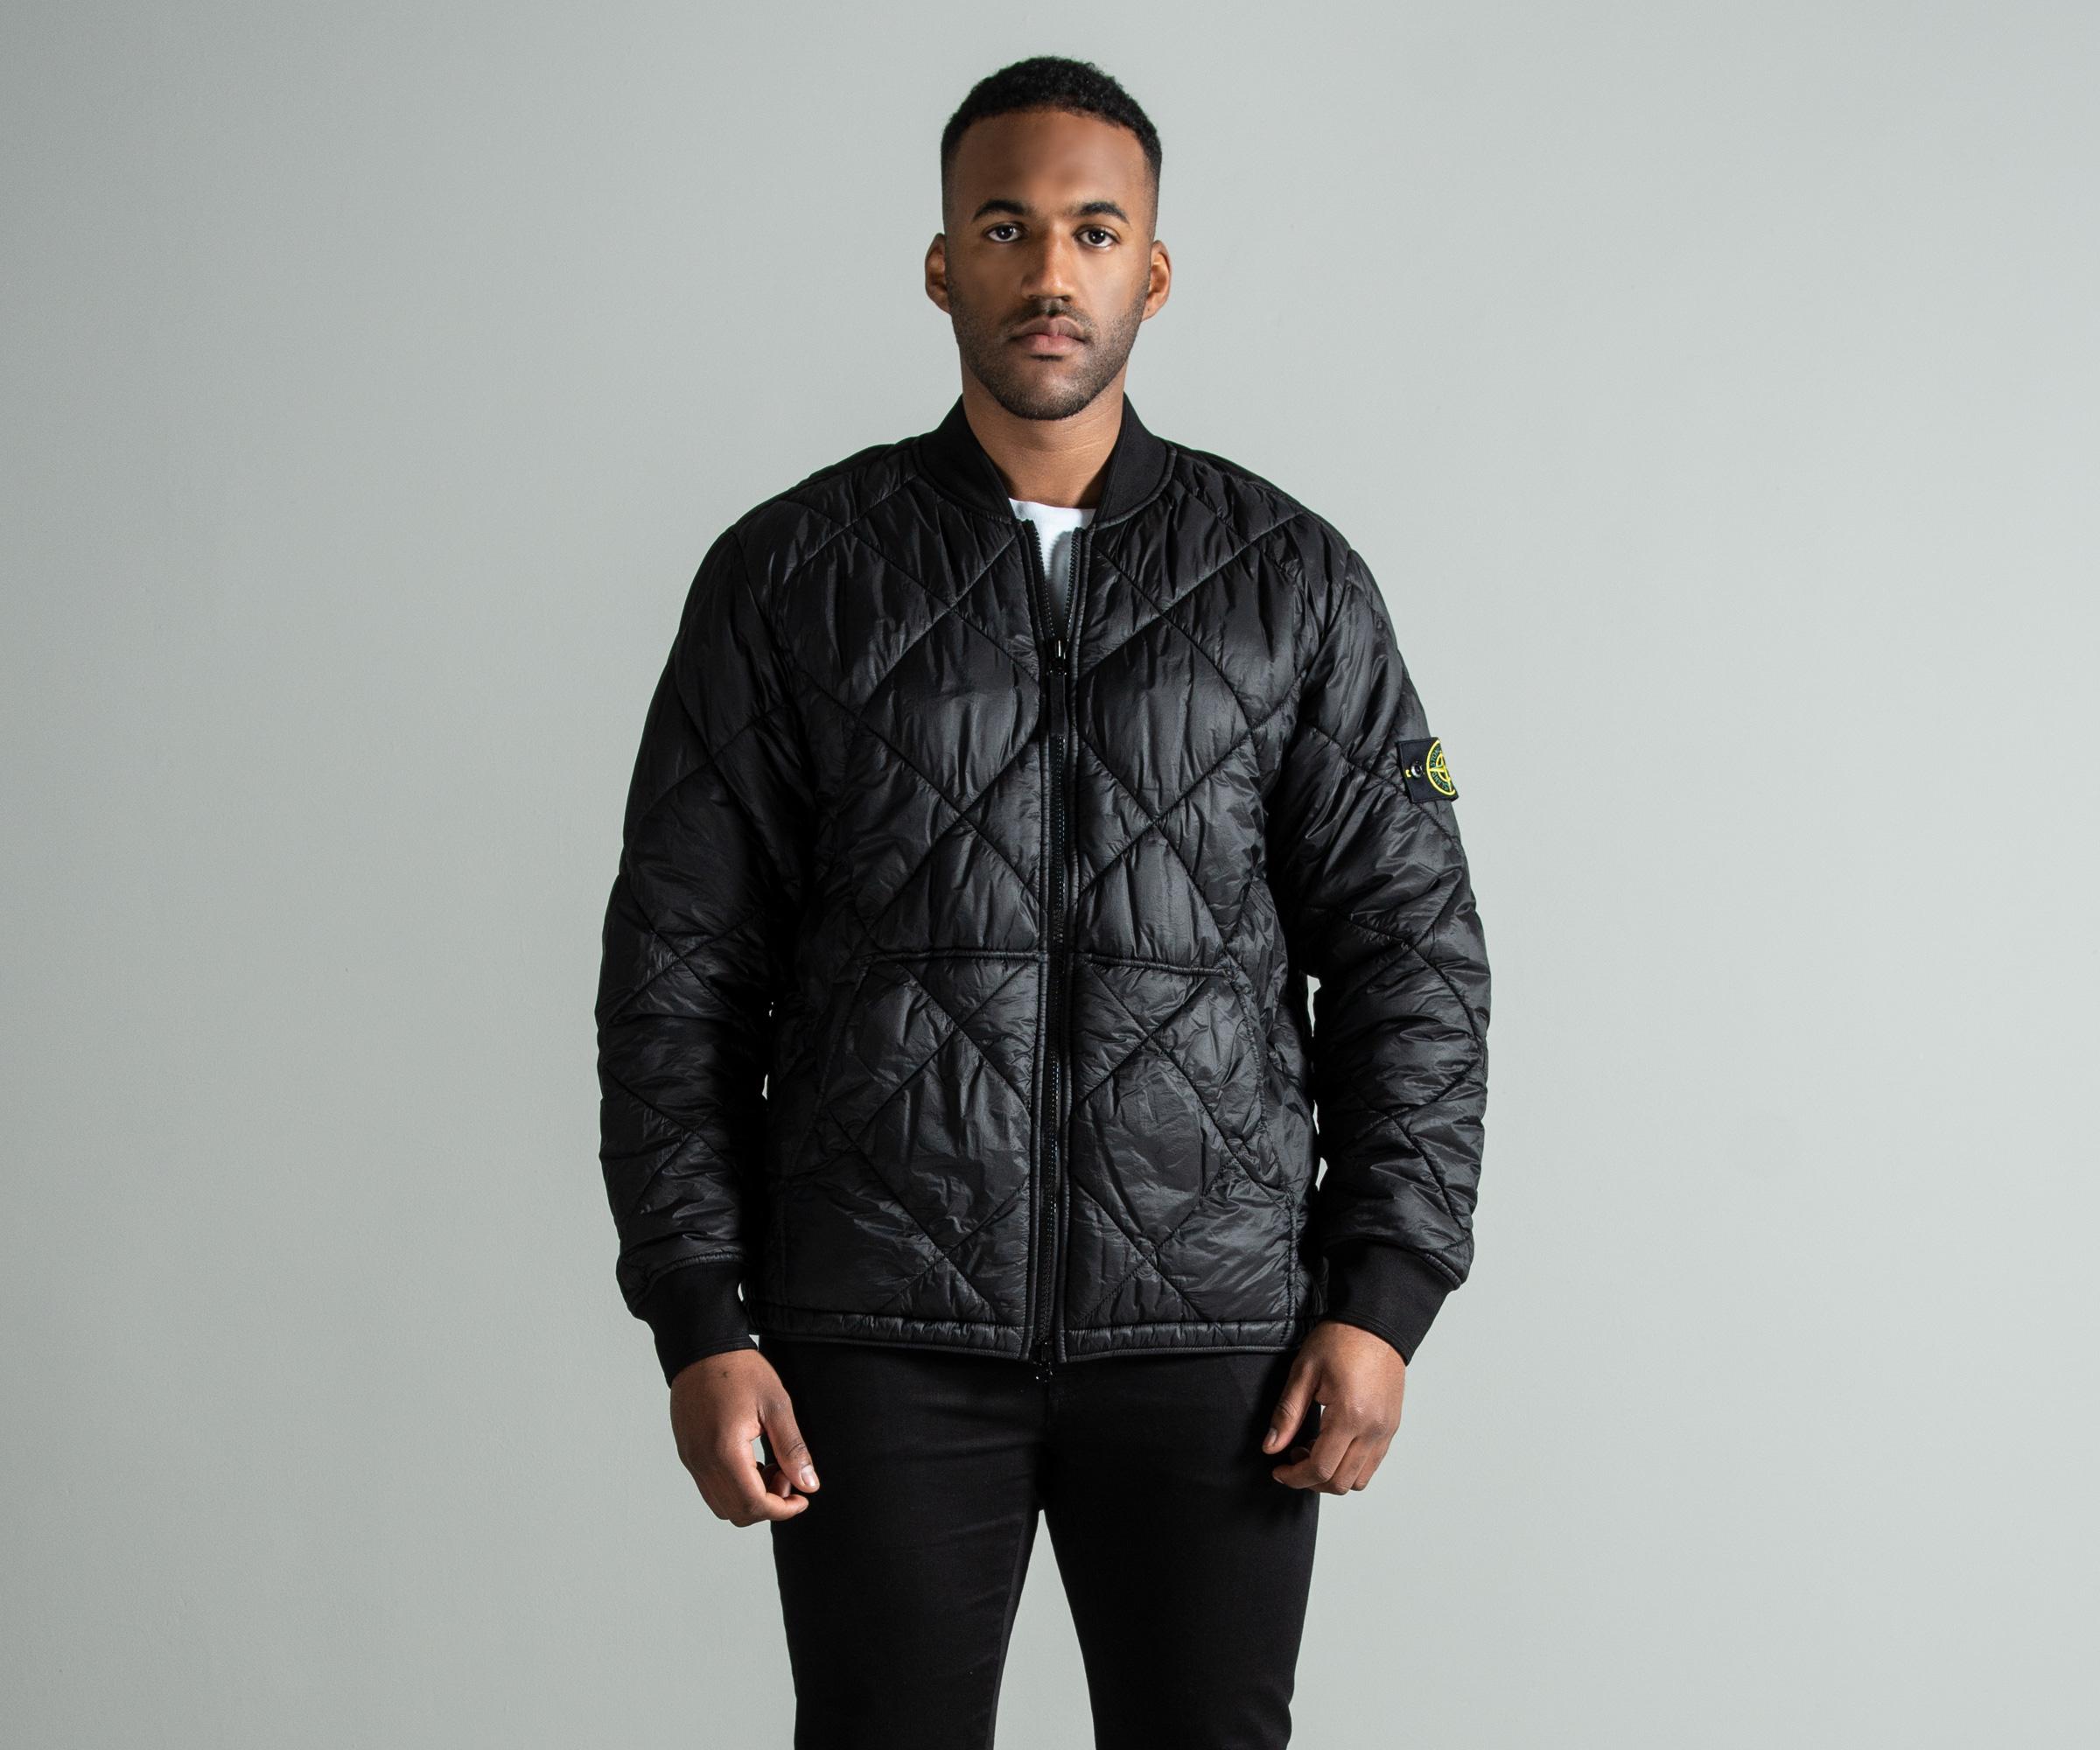 Stone Island Garment Dyed Quilted Micro Yarn Jacket Online, SAVE 35% -  arriola-tanzstudio.at